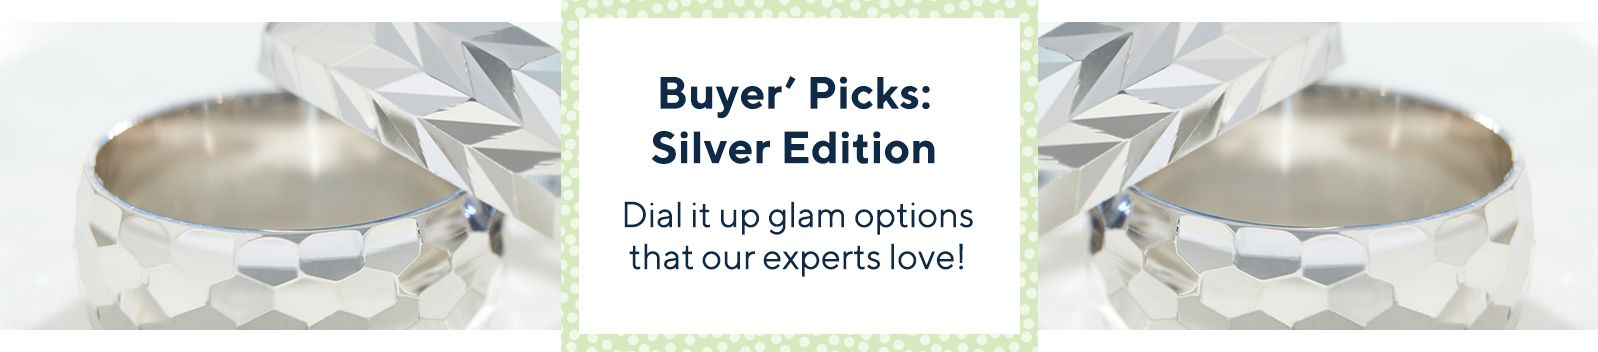 Buyers' Picks: Silver Edition  Dial it up with glam options that our experts love!